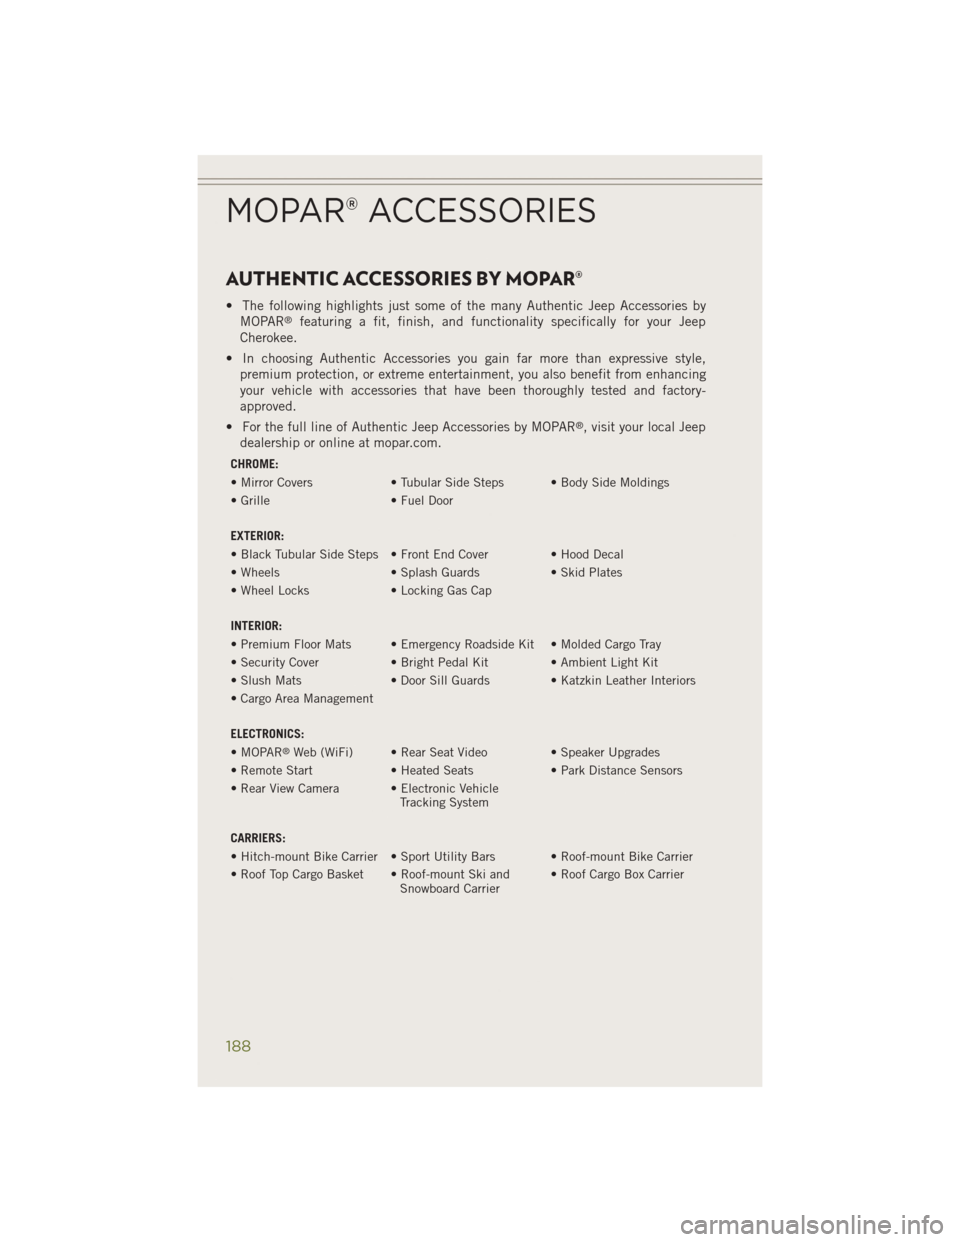 JEEP CHEROKEE 2014 KL / 5.G User Guide AUTHENTIC ACCESSORIES BY MOPAR®
• The following highlights just some of the many Authentic Jeep Accessories byMOPAR®featuring a fit, finish, and functionality specifically for your Jeep
Cherokee.
